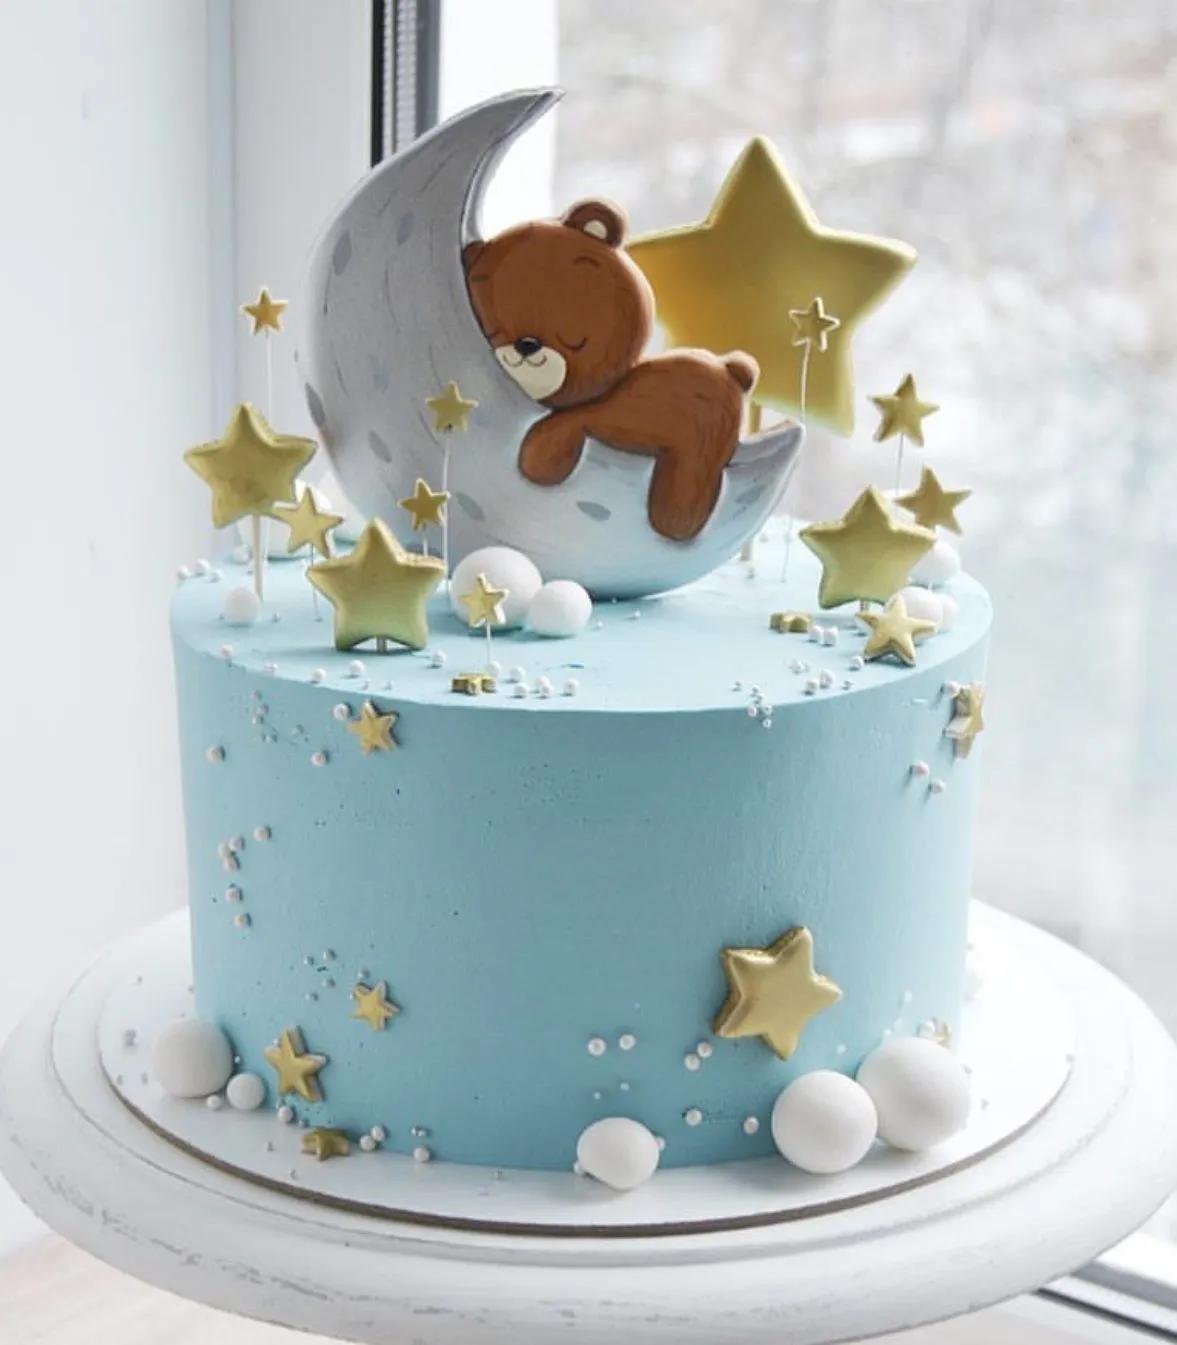 Great idea for a baby shower cake with teddy bear sleeping on the moon ...